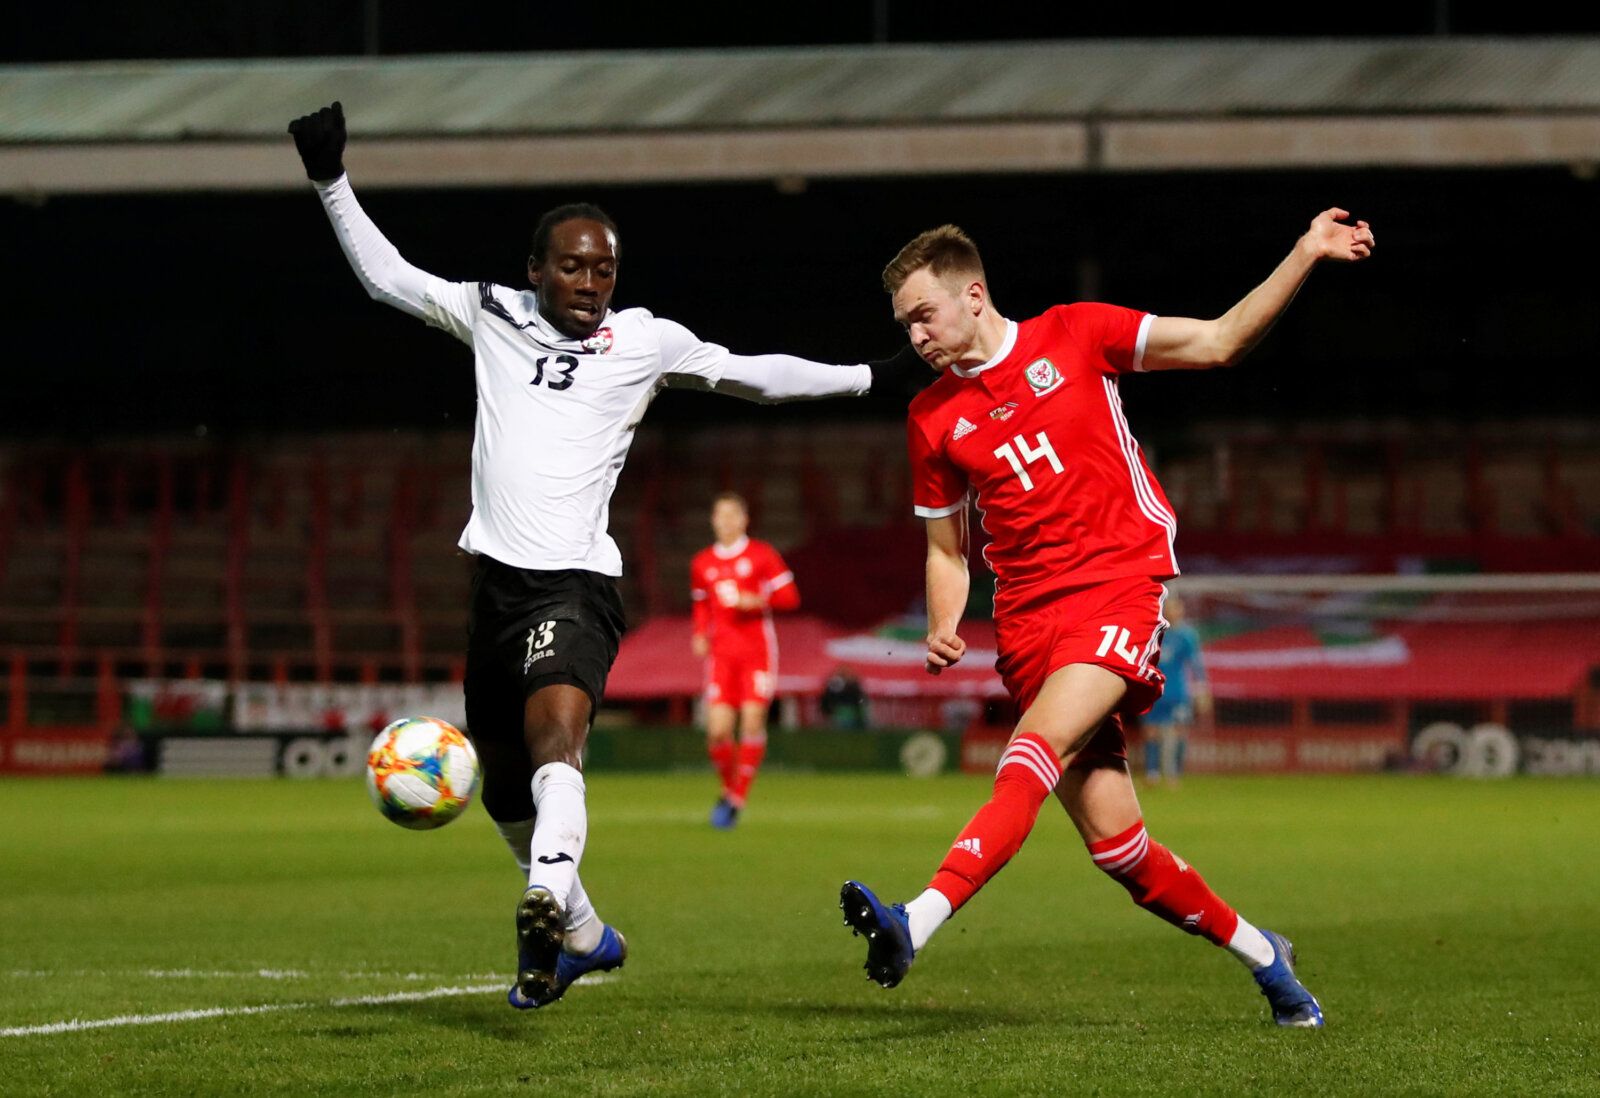 Soccer Football - International Friendly - Wales v Trinidad and Tobago - The Racecourse, Wrexham, Britain - March 20, 2019  Trinidad and Tobago's Nathan Lewis in action with Wales' Ryan Hedges   Action Images via Reuters/Andrew Boyers